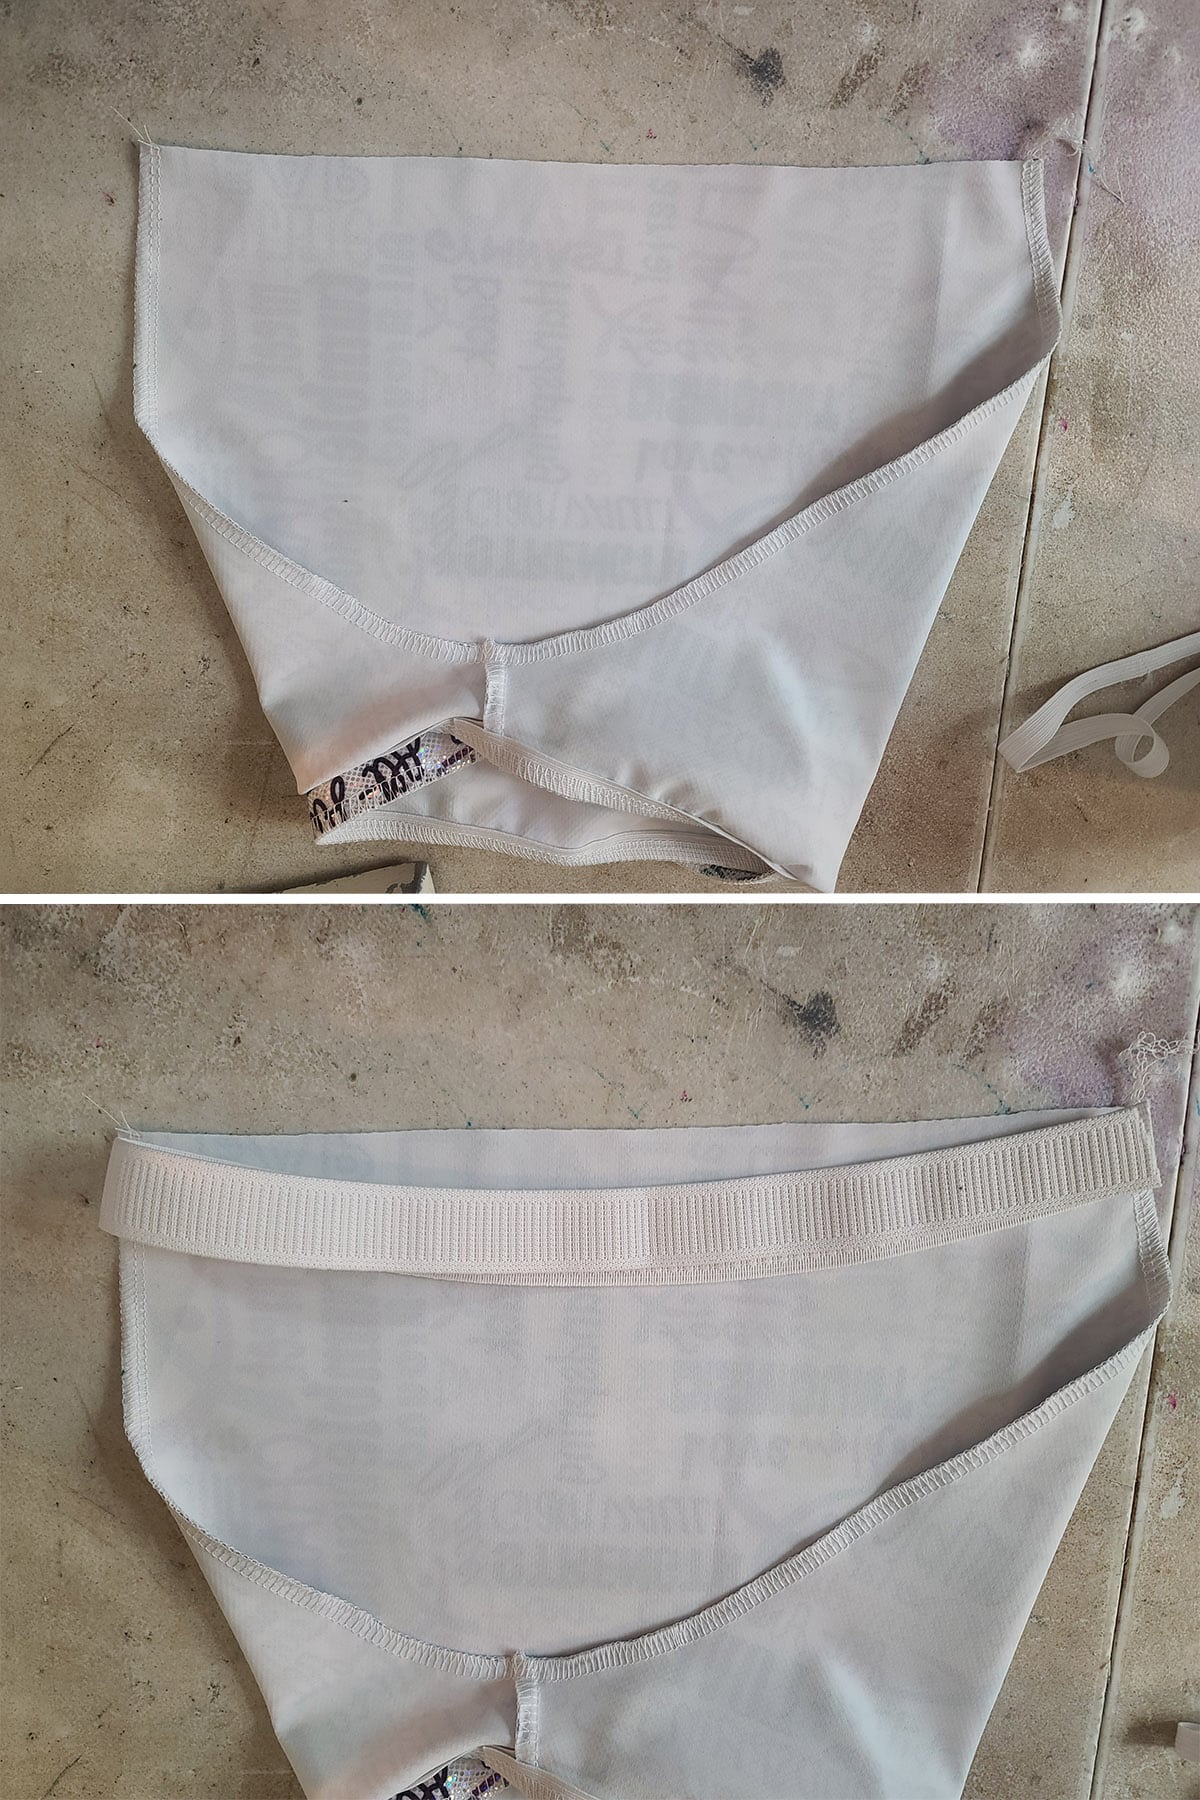 A 4 part image showing elastic being measured against the waist of a pair of booty shorts.